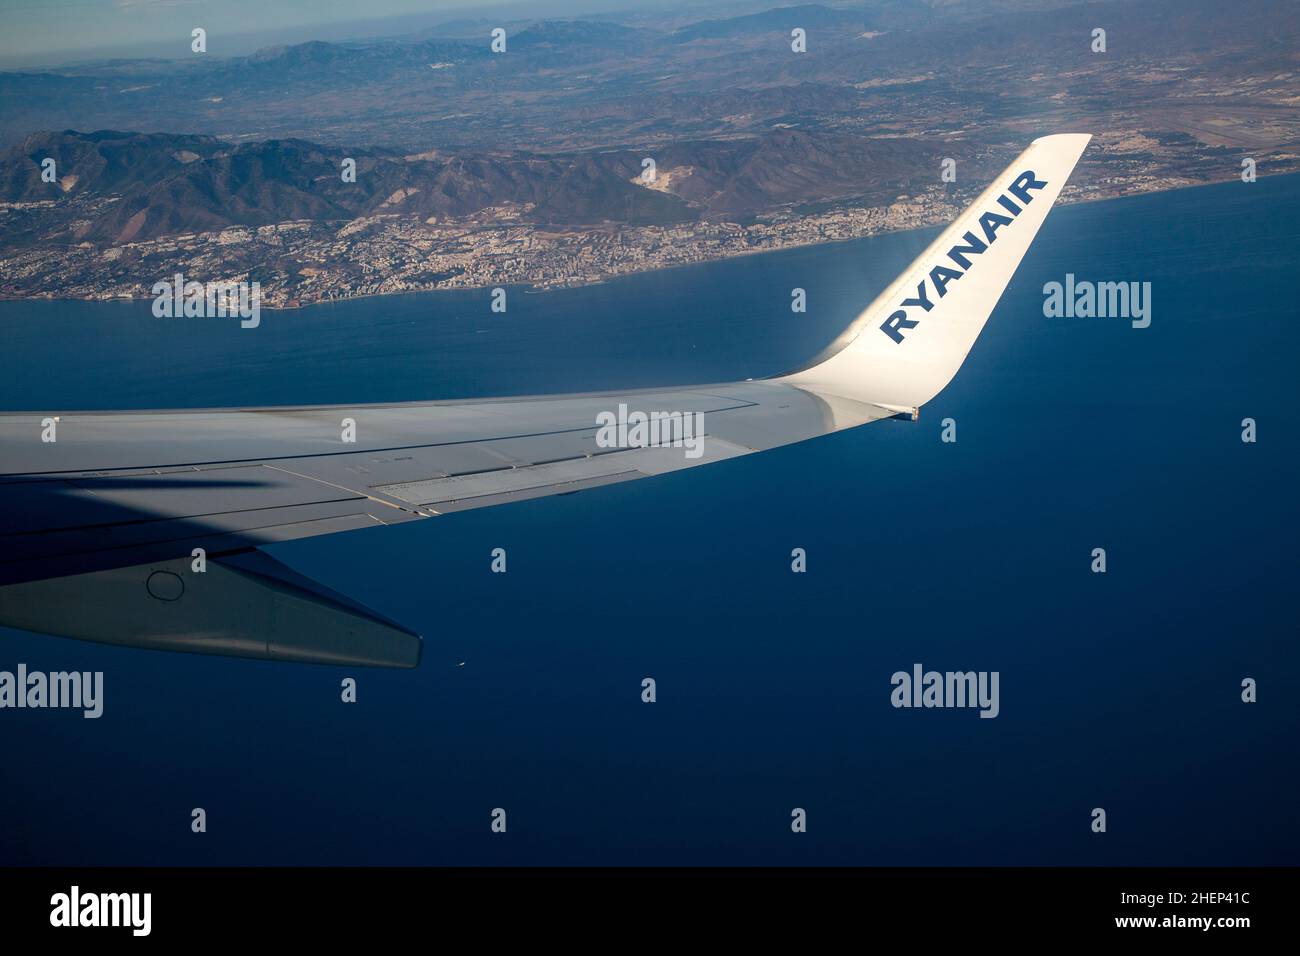 Wing of Ryanair aircraft above Mediterranean Sea over the Costa del Sol taking off from Malaga, Spain Stock Photo